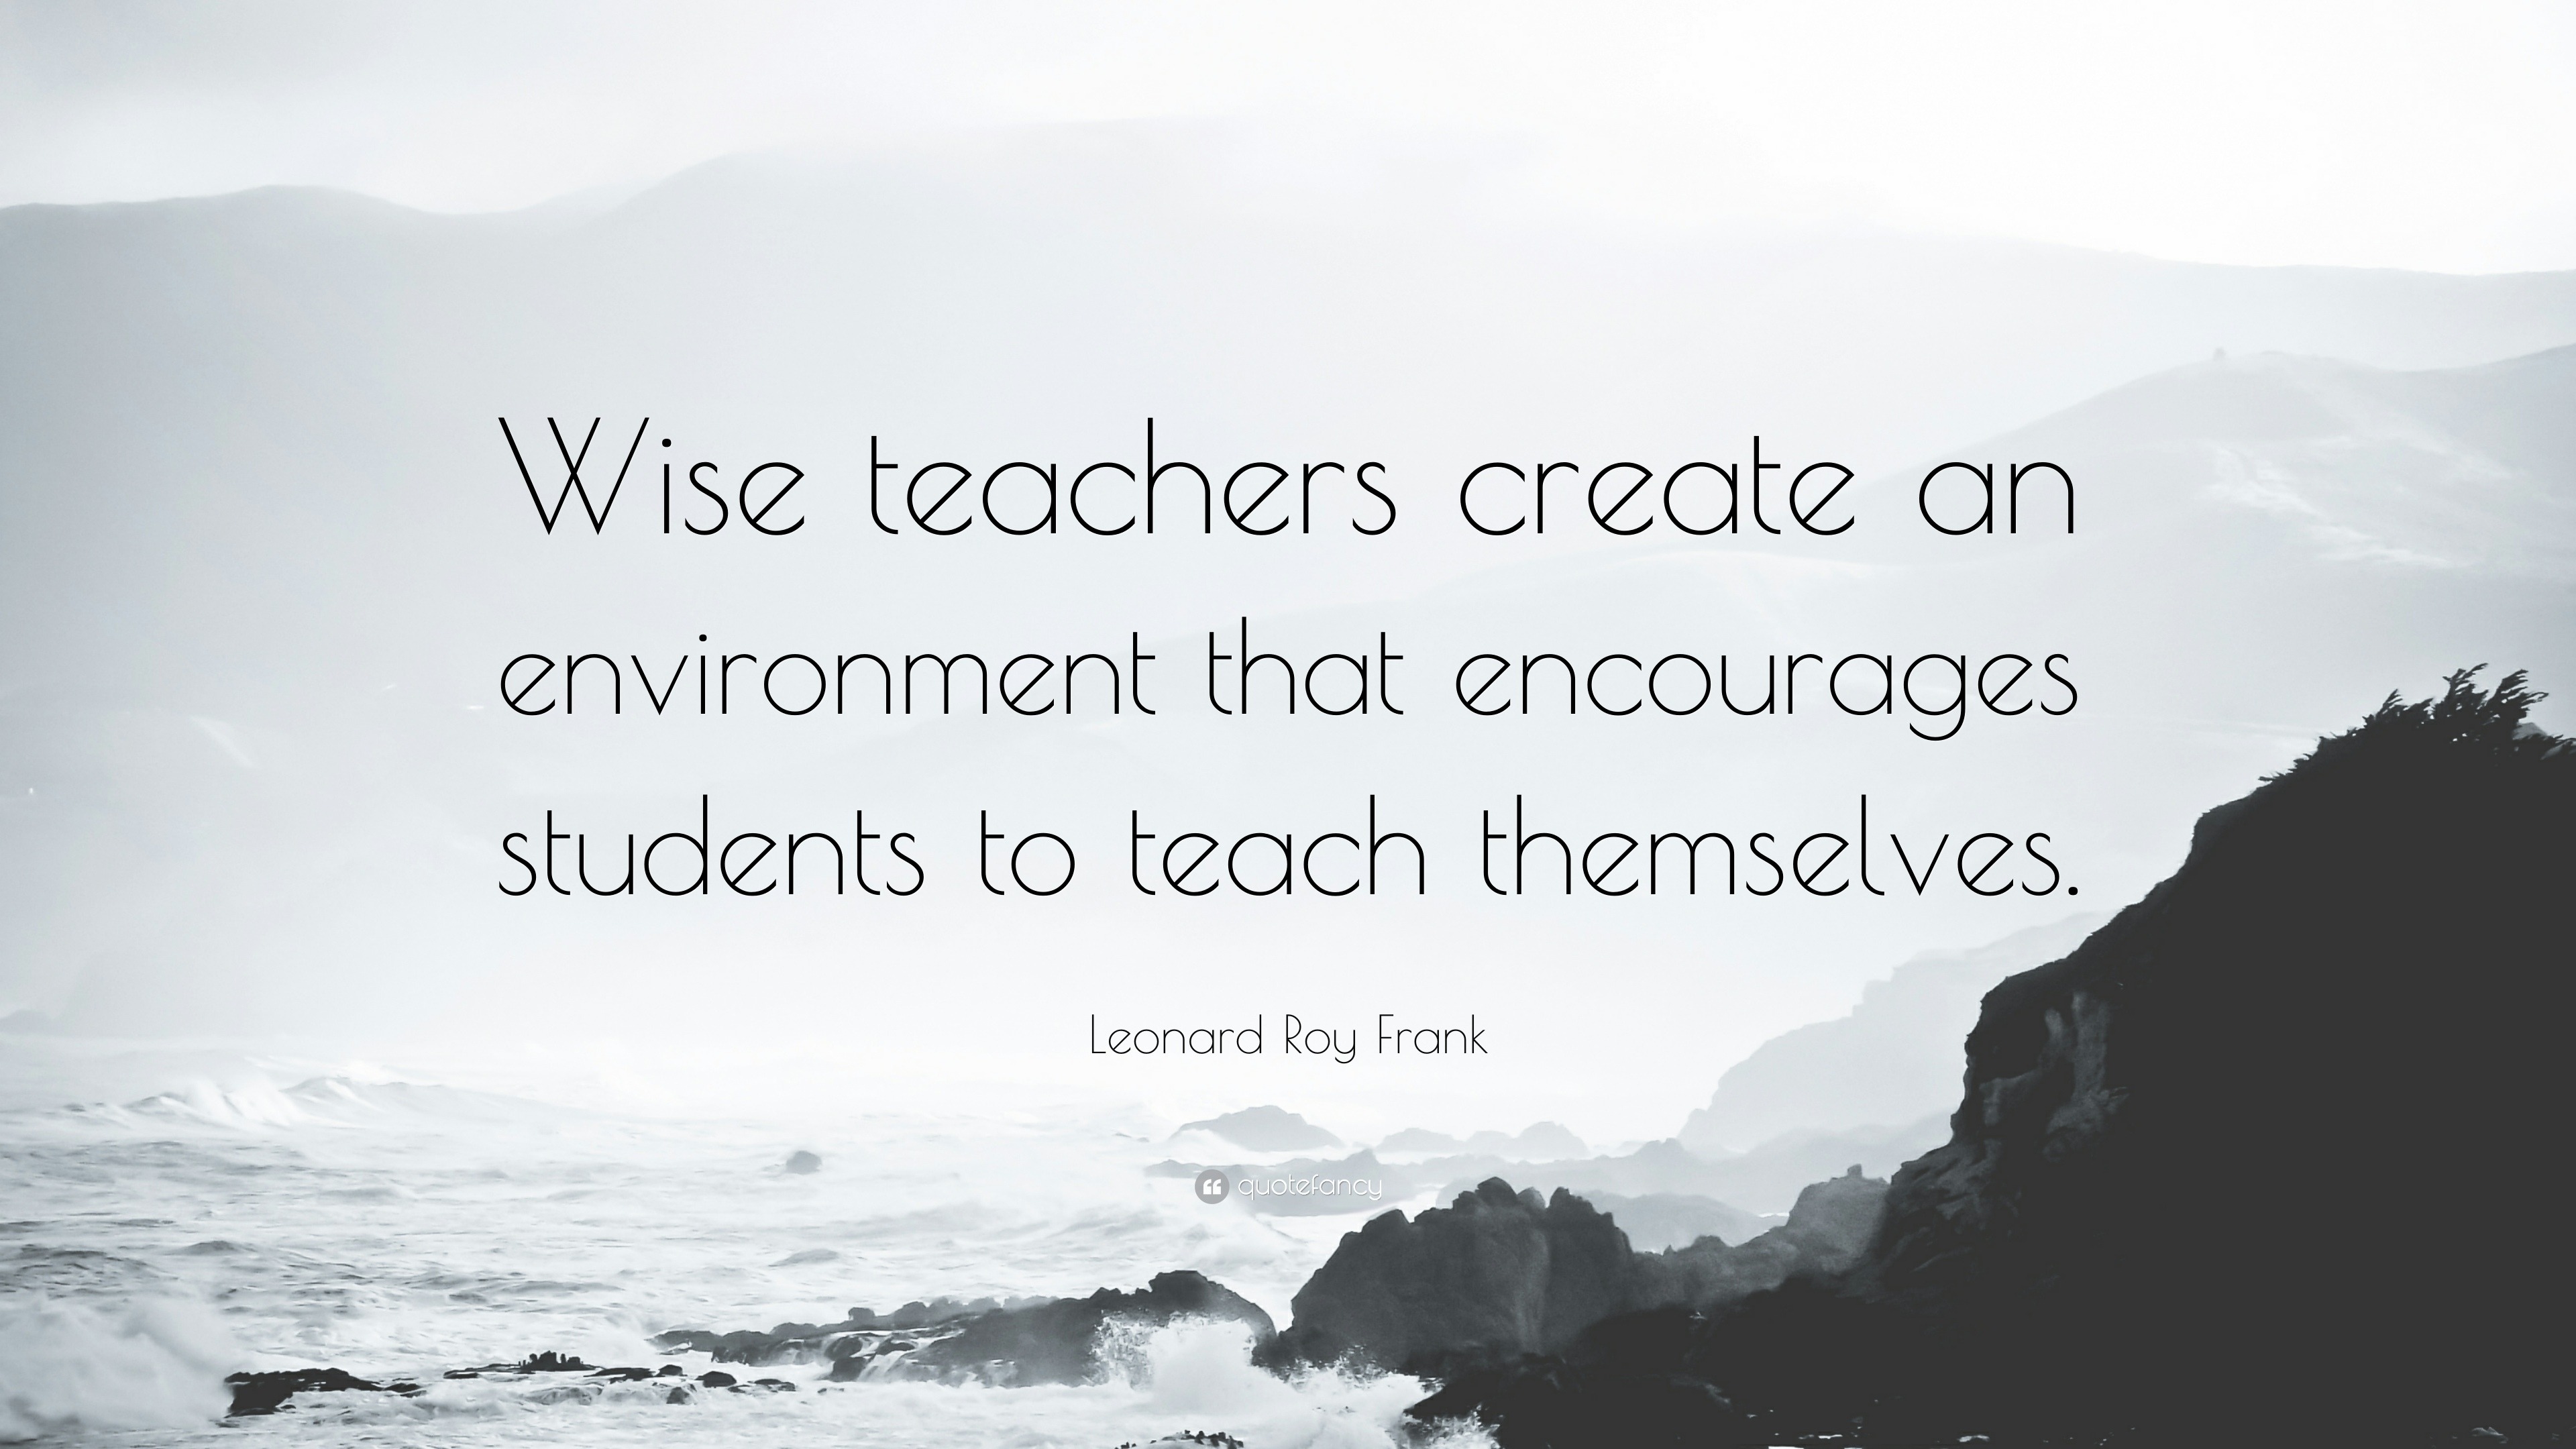 Leonard Roy Frank Quote: “Wise teachers create an environment that